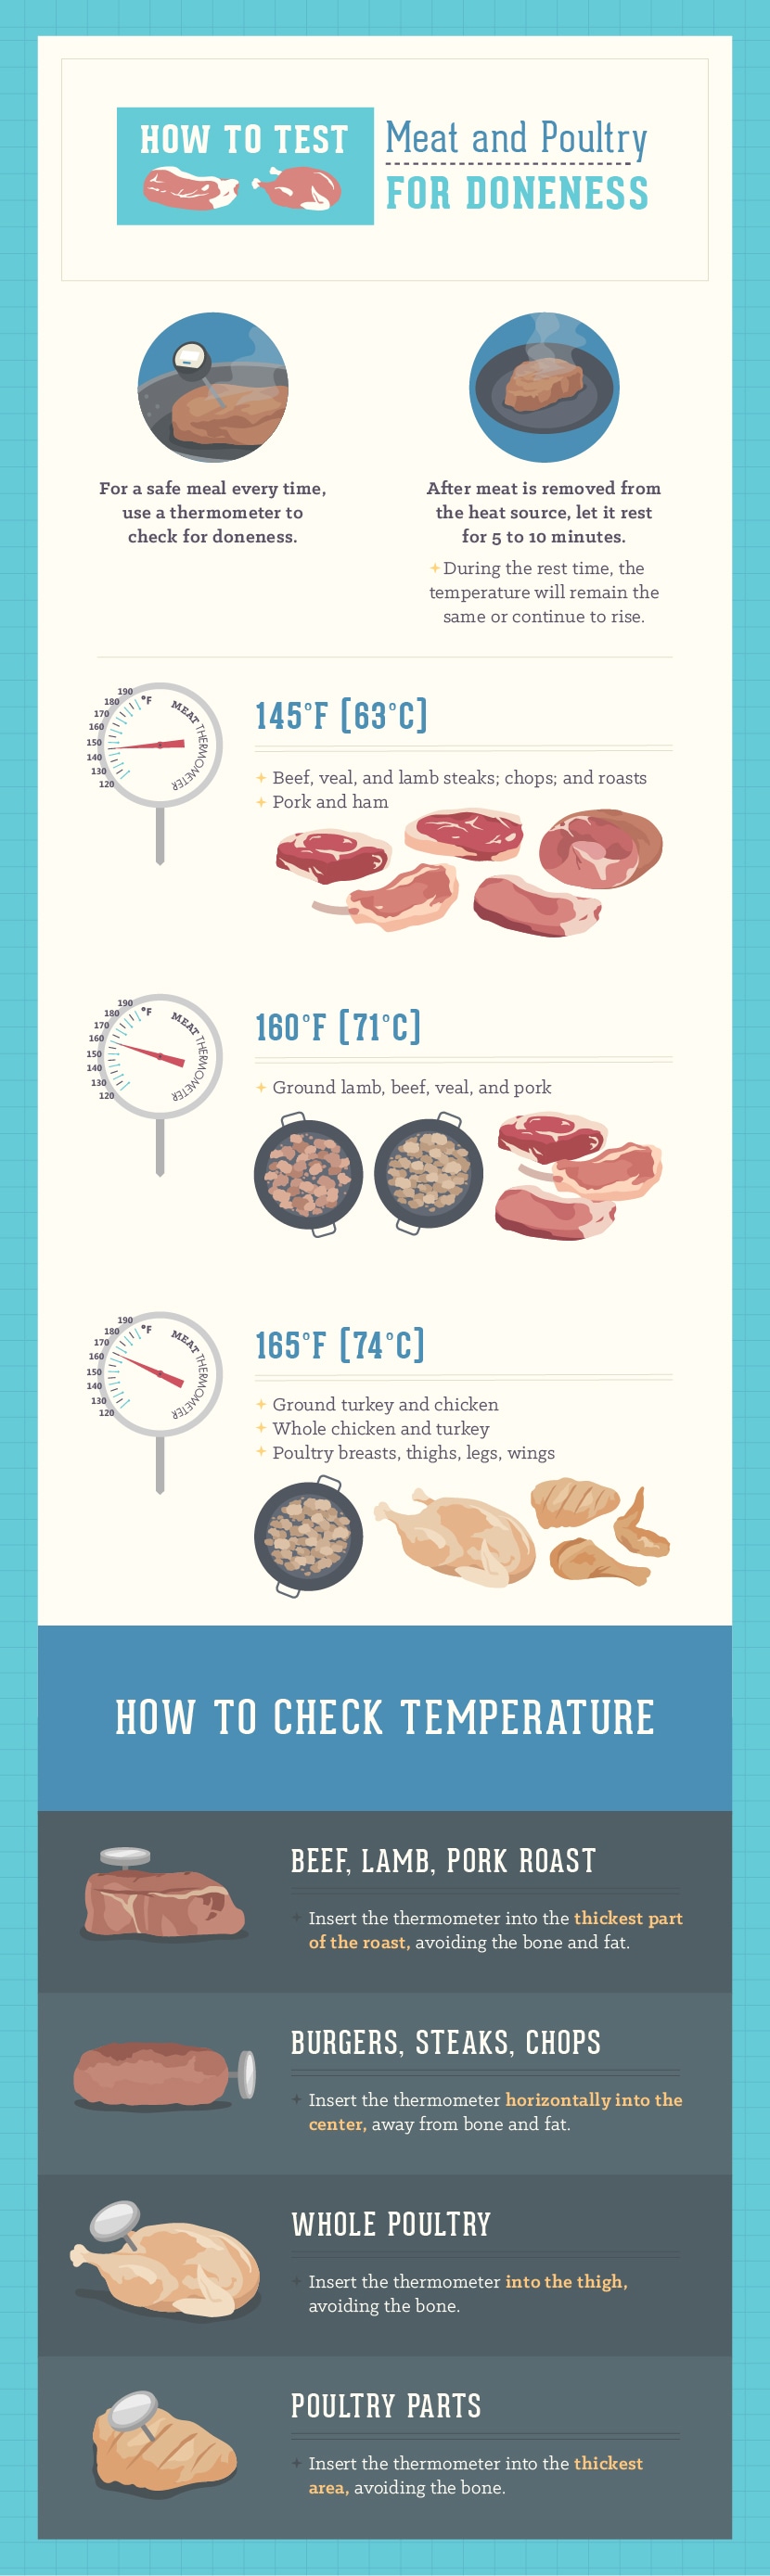 Testing Meat and Poultry for Doneness - How to Cook Meat Properly